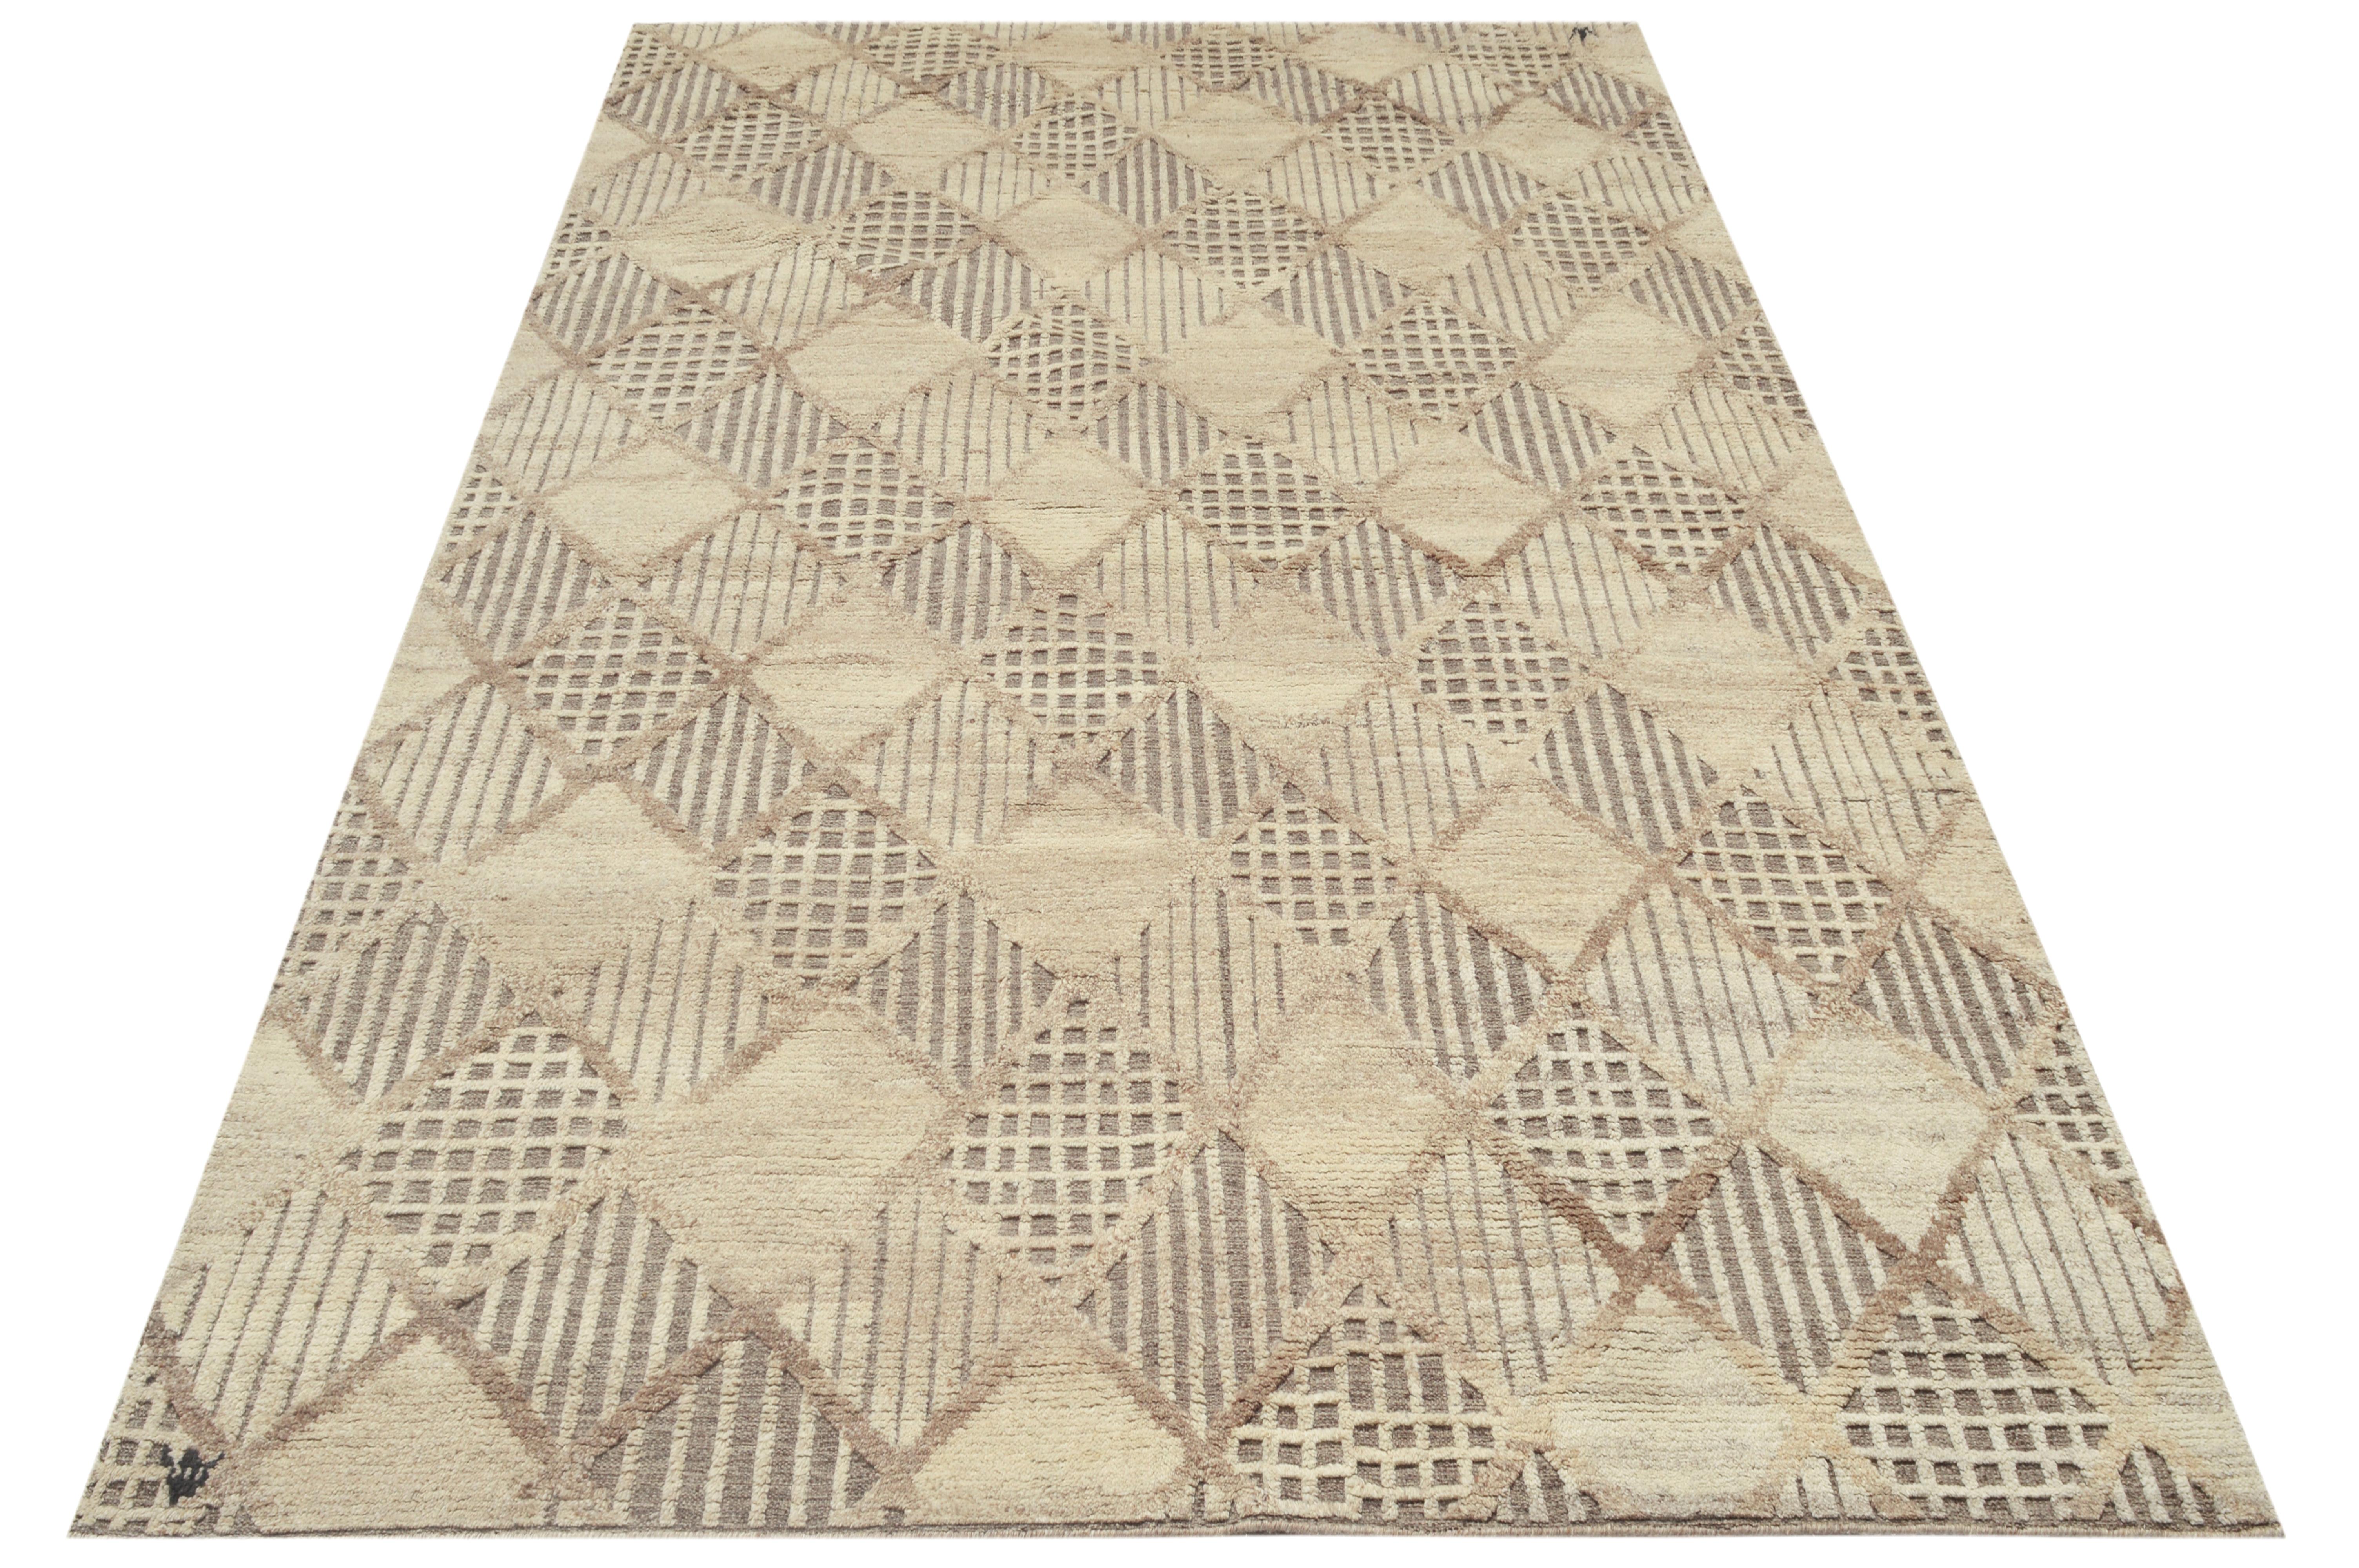 Hand-knotted wool pile on a cotton foundation.

High-low pile design.

Approximate dimensions: 10' x 14'.

Origin: India

Field color: ivory.

Accent color: brown.